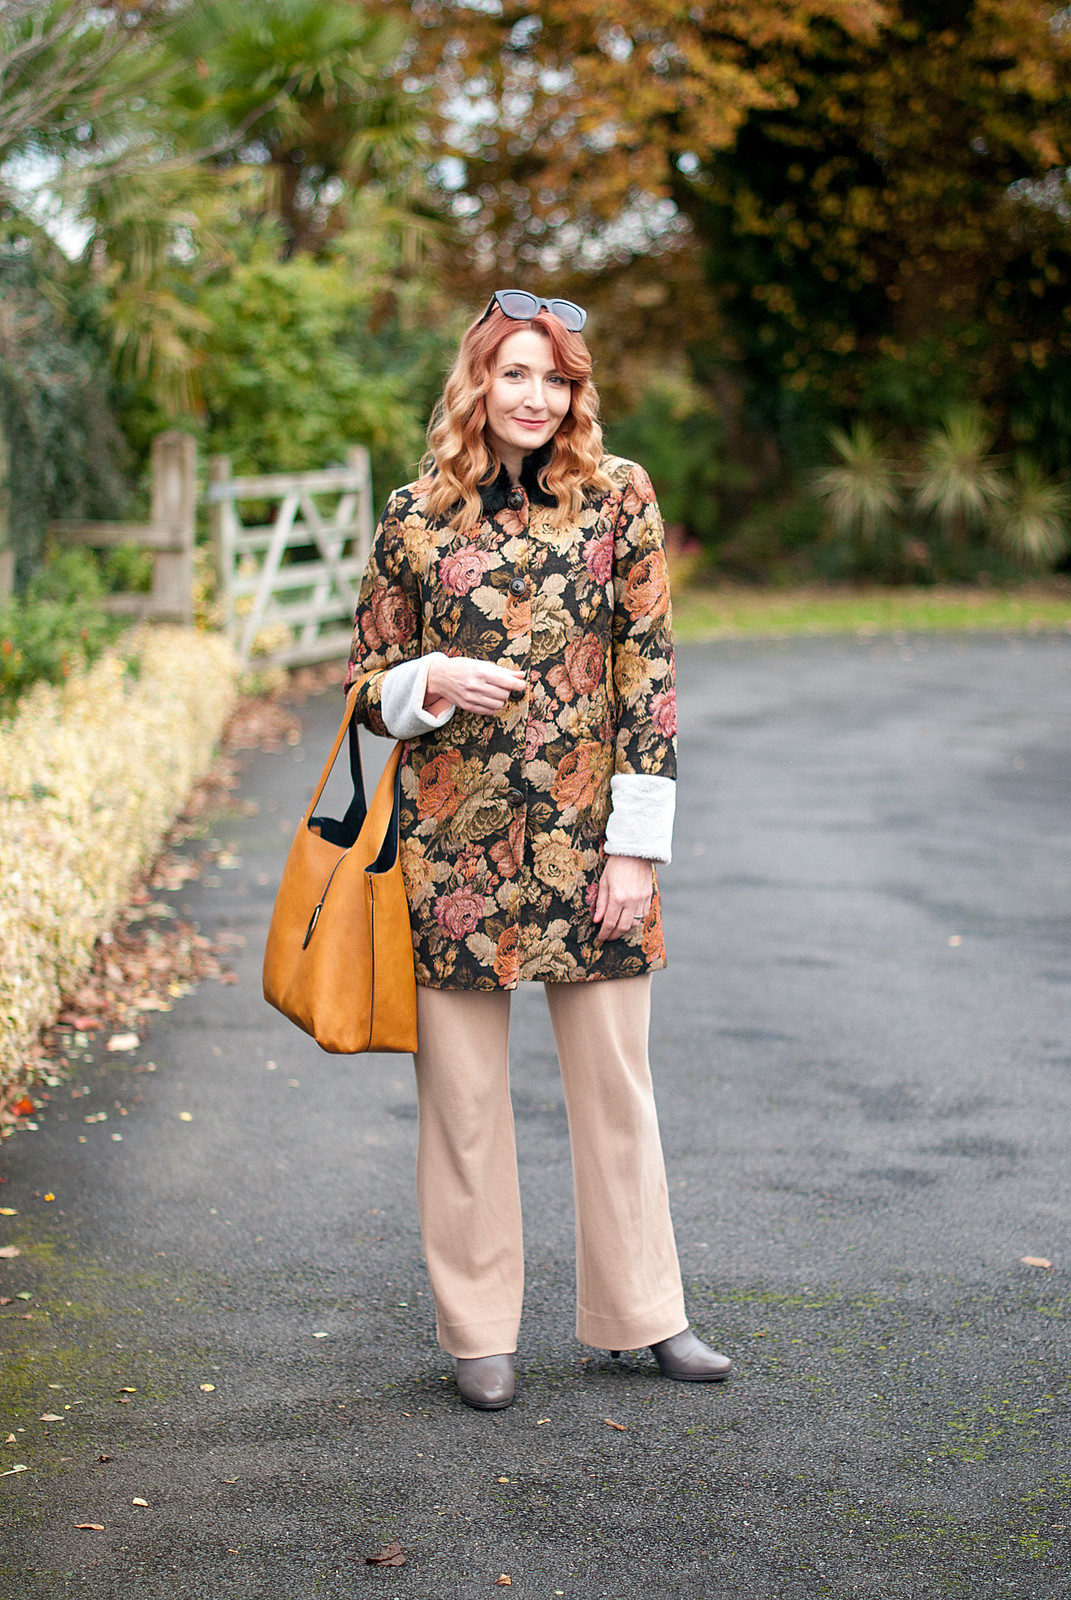 Autumn dressing, fall outfits, winter florals: Floral tapestry coat with fur collar, wide leg camel trousers, grey ankle boots | Not Dressed As Lamb, over 40 fashion